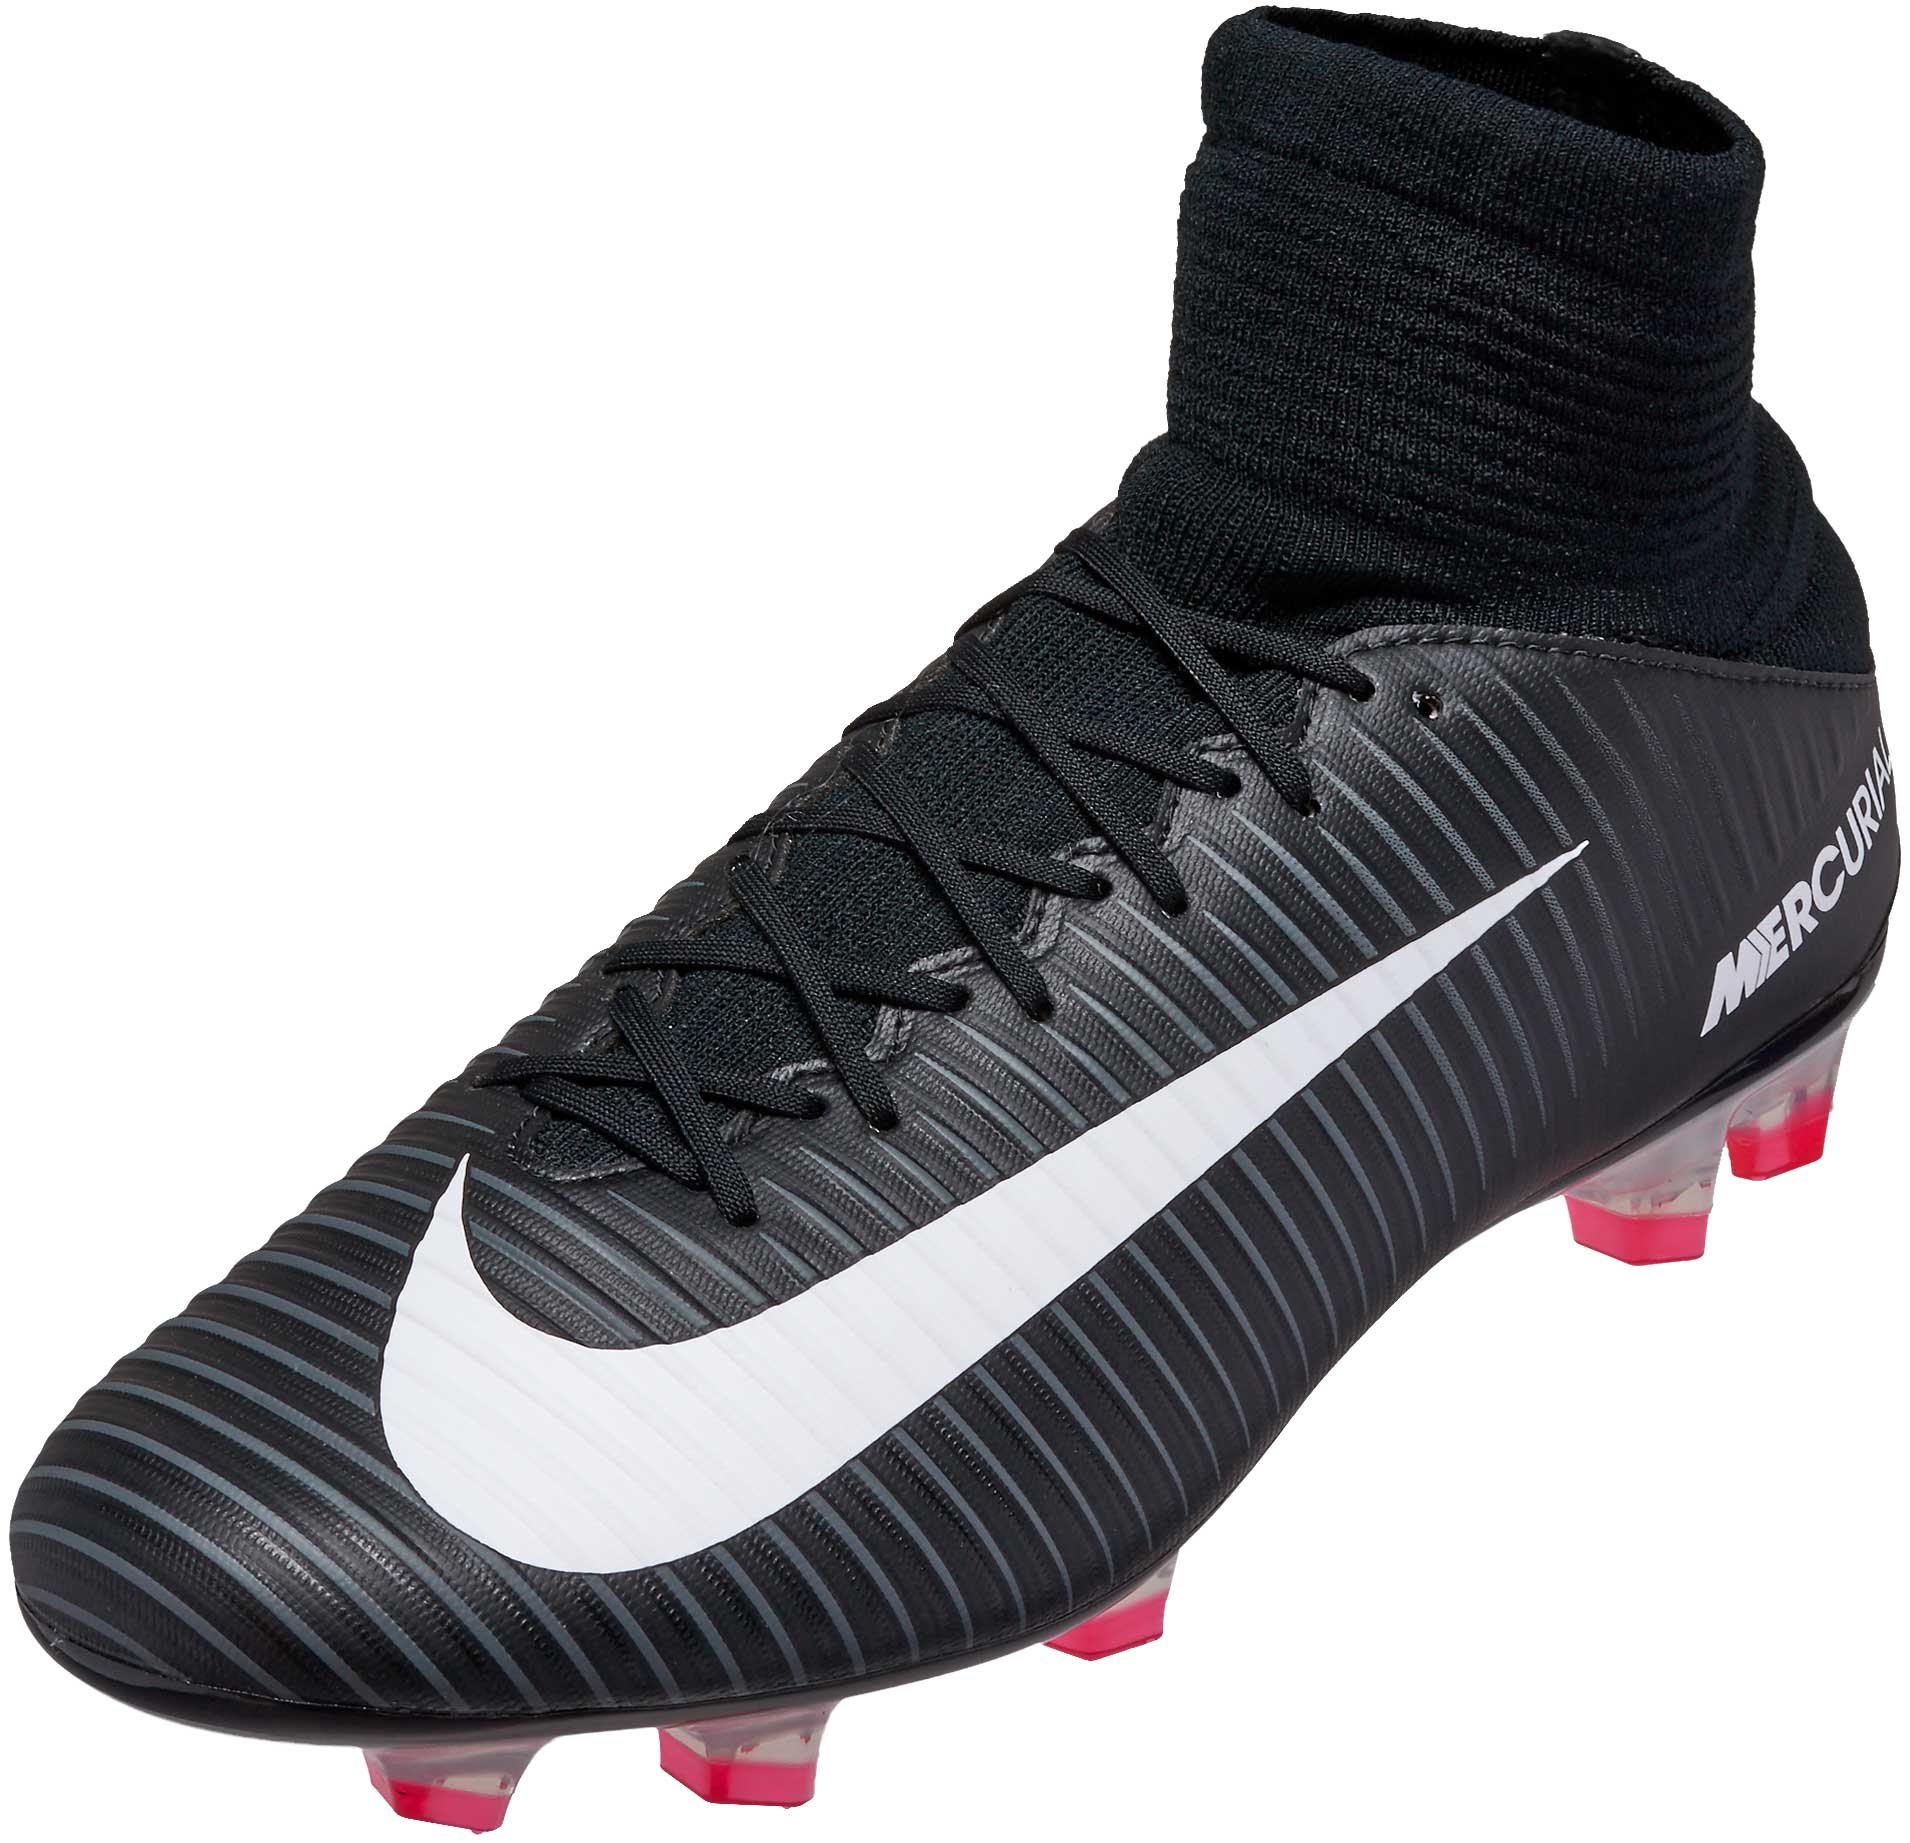 nike black and white soccer cleats